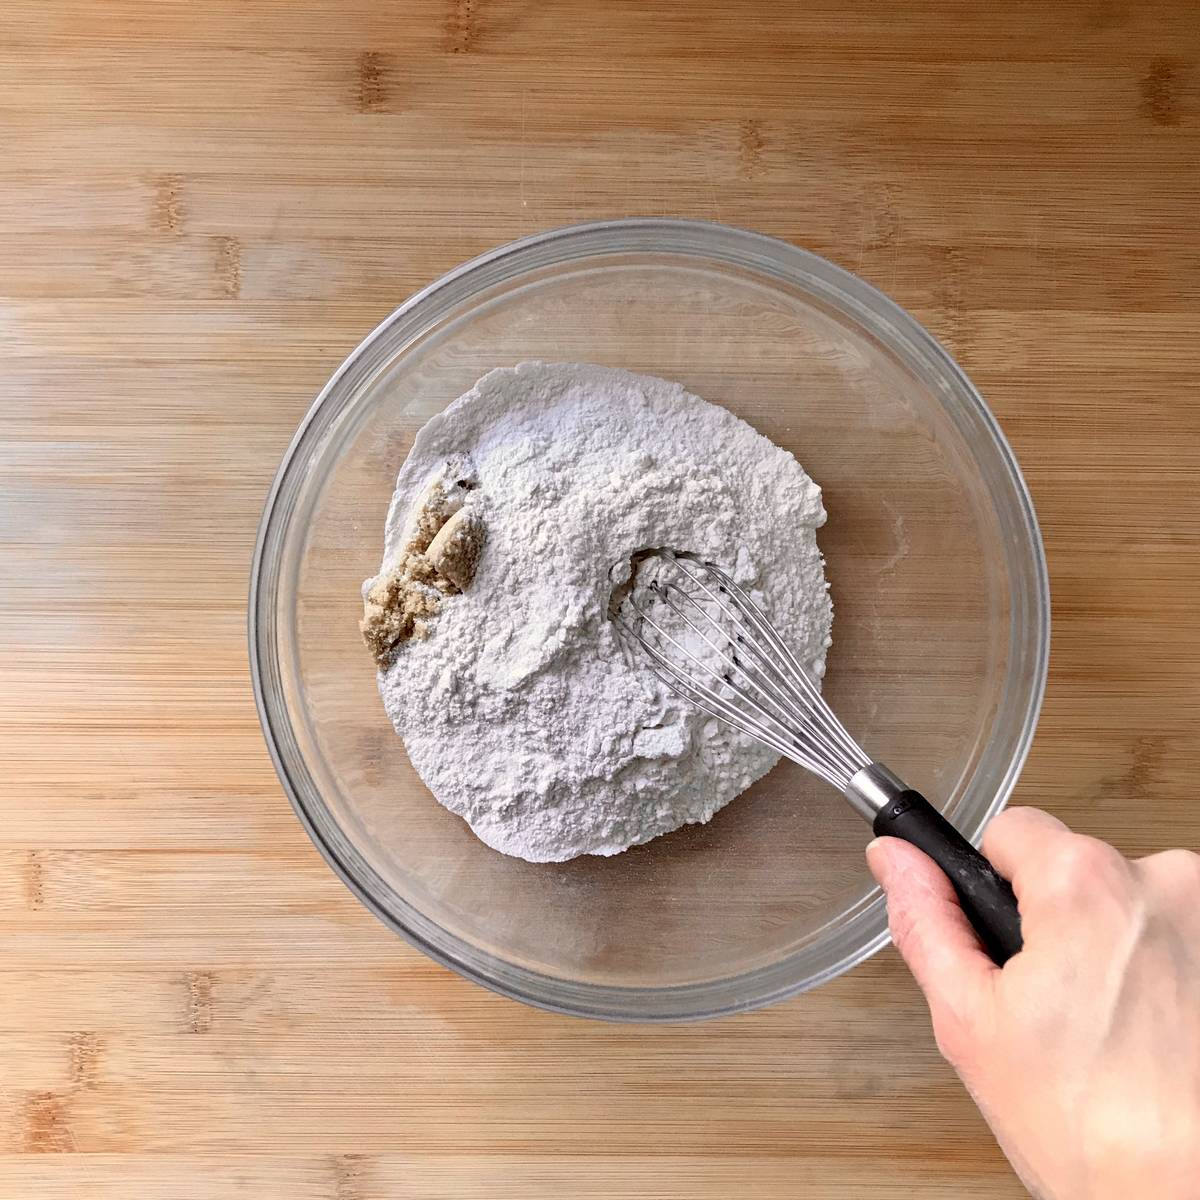 Flour, baking powder, baking soda, salt and brown sugar being whisked together in a bowl.